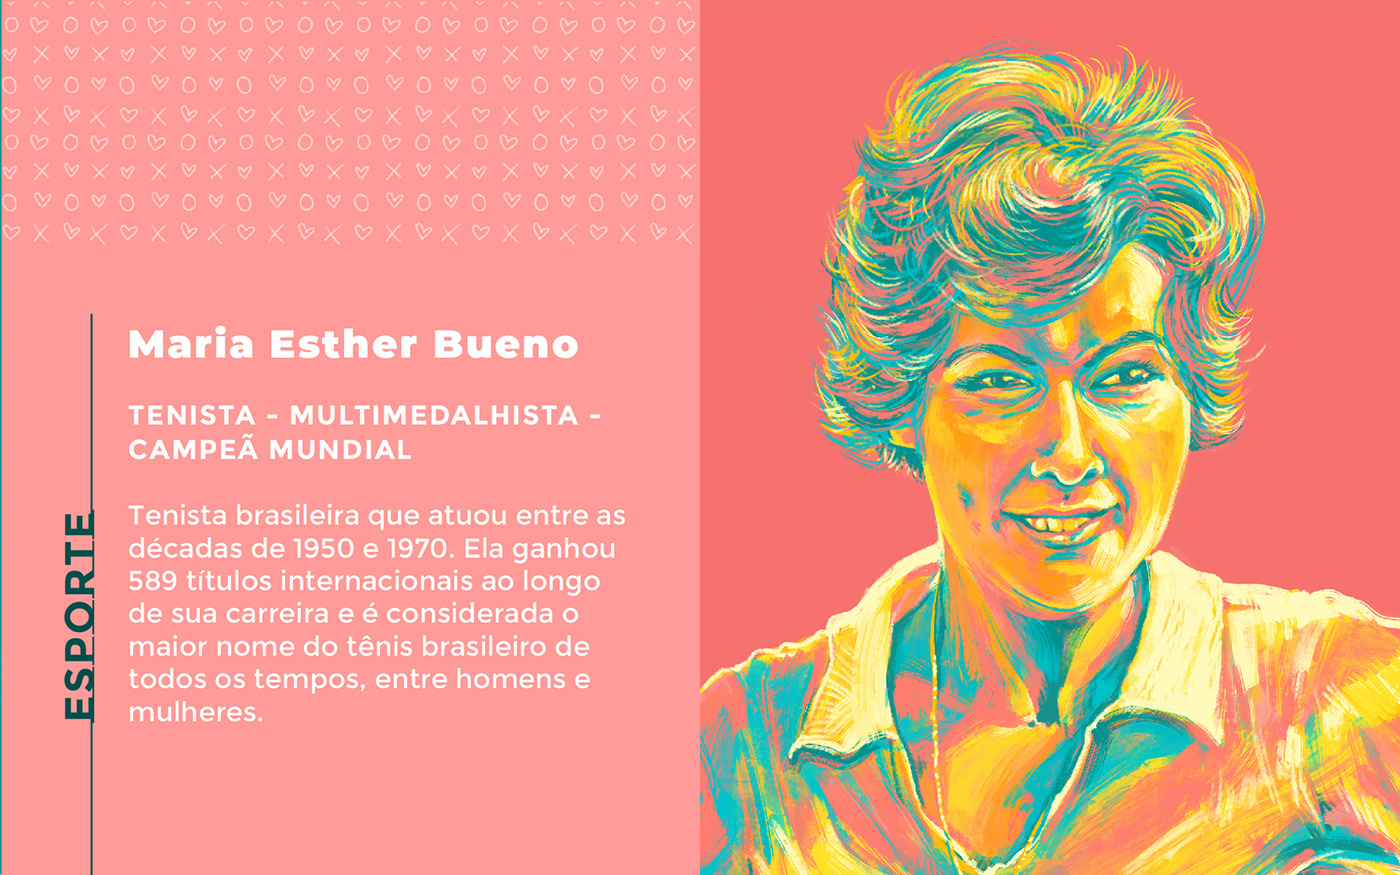 An illustrated portrait of Maria Esther Bueno, a famous brazilian tennist.
